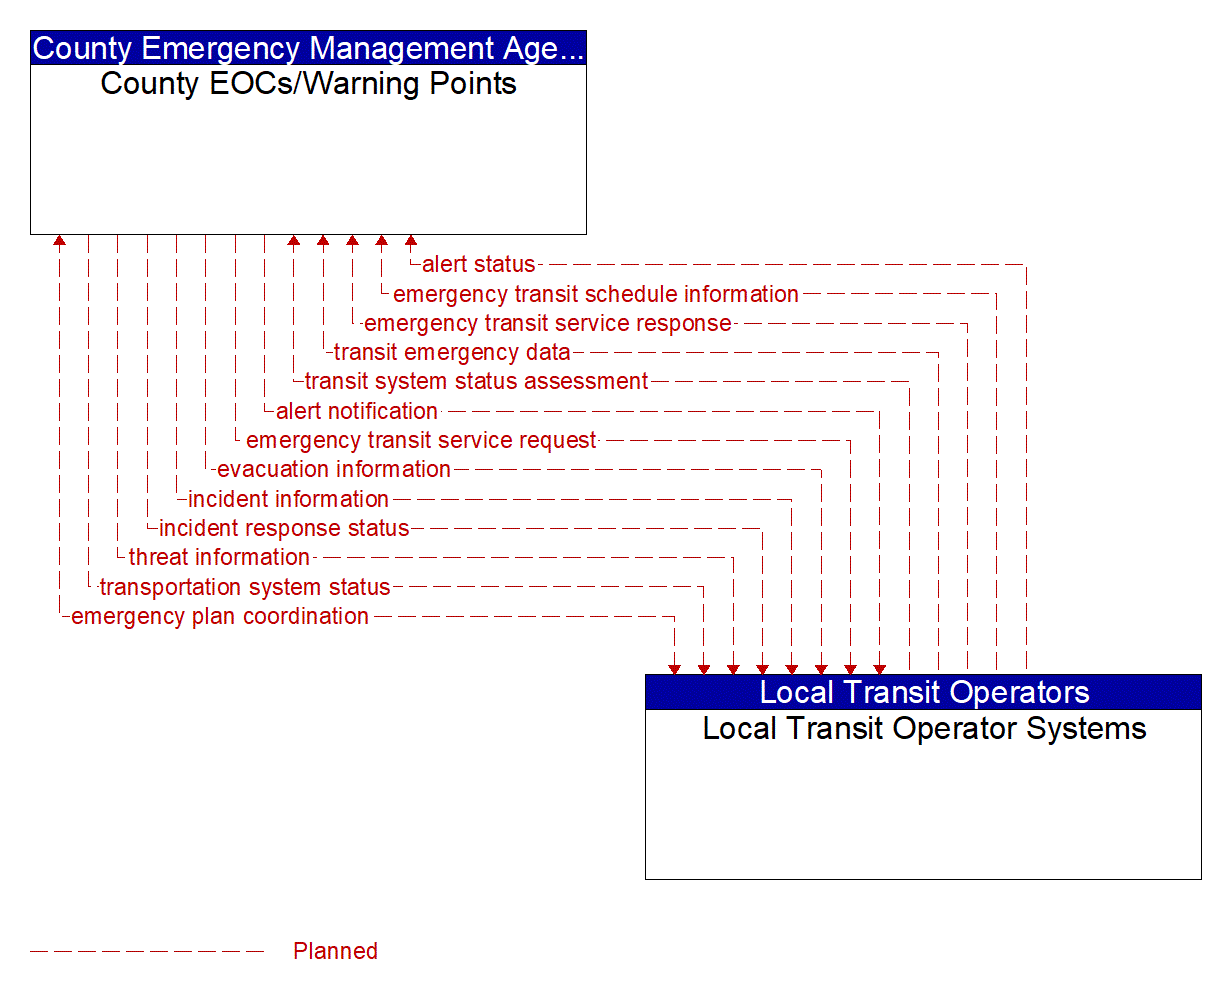 Architecture Flow Diagram: Local Transit Operator Systems <--> County EOCs/Warning Points